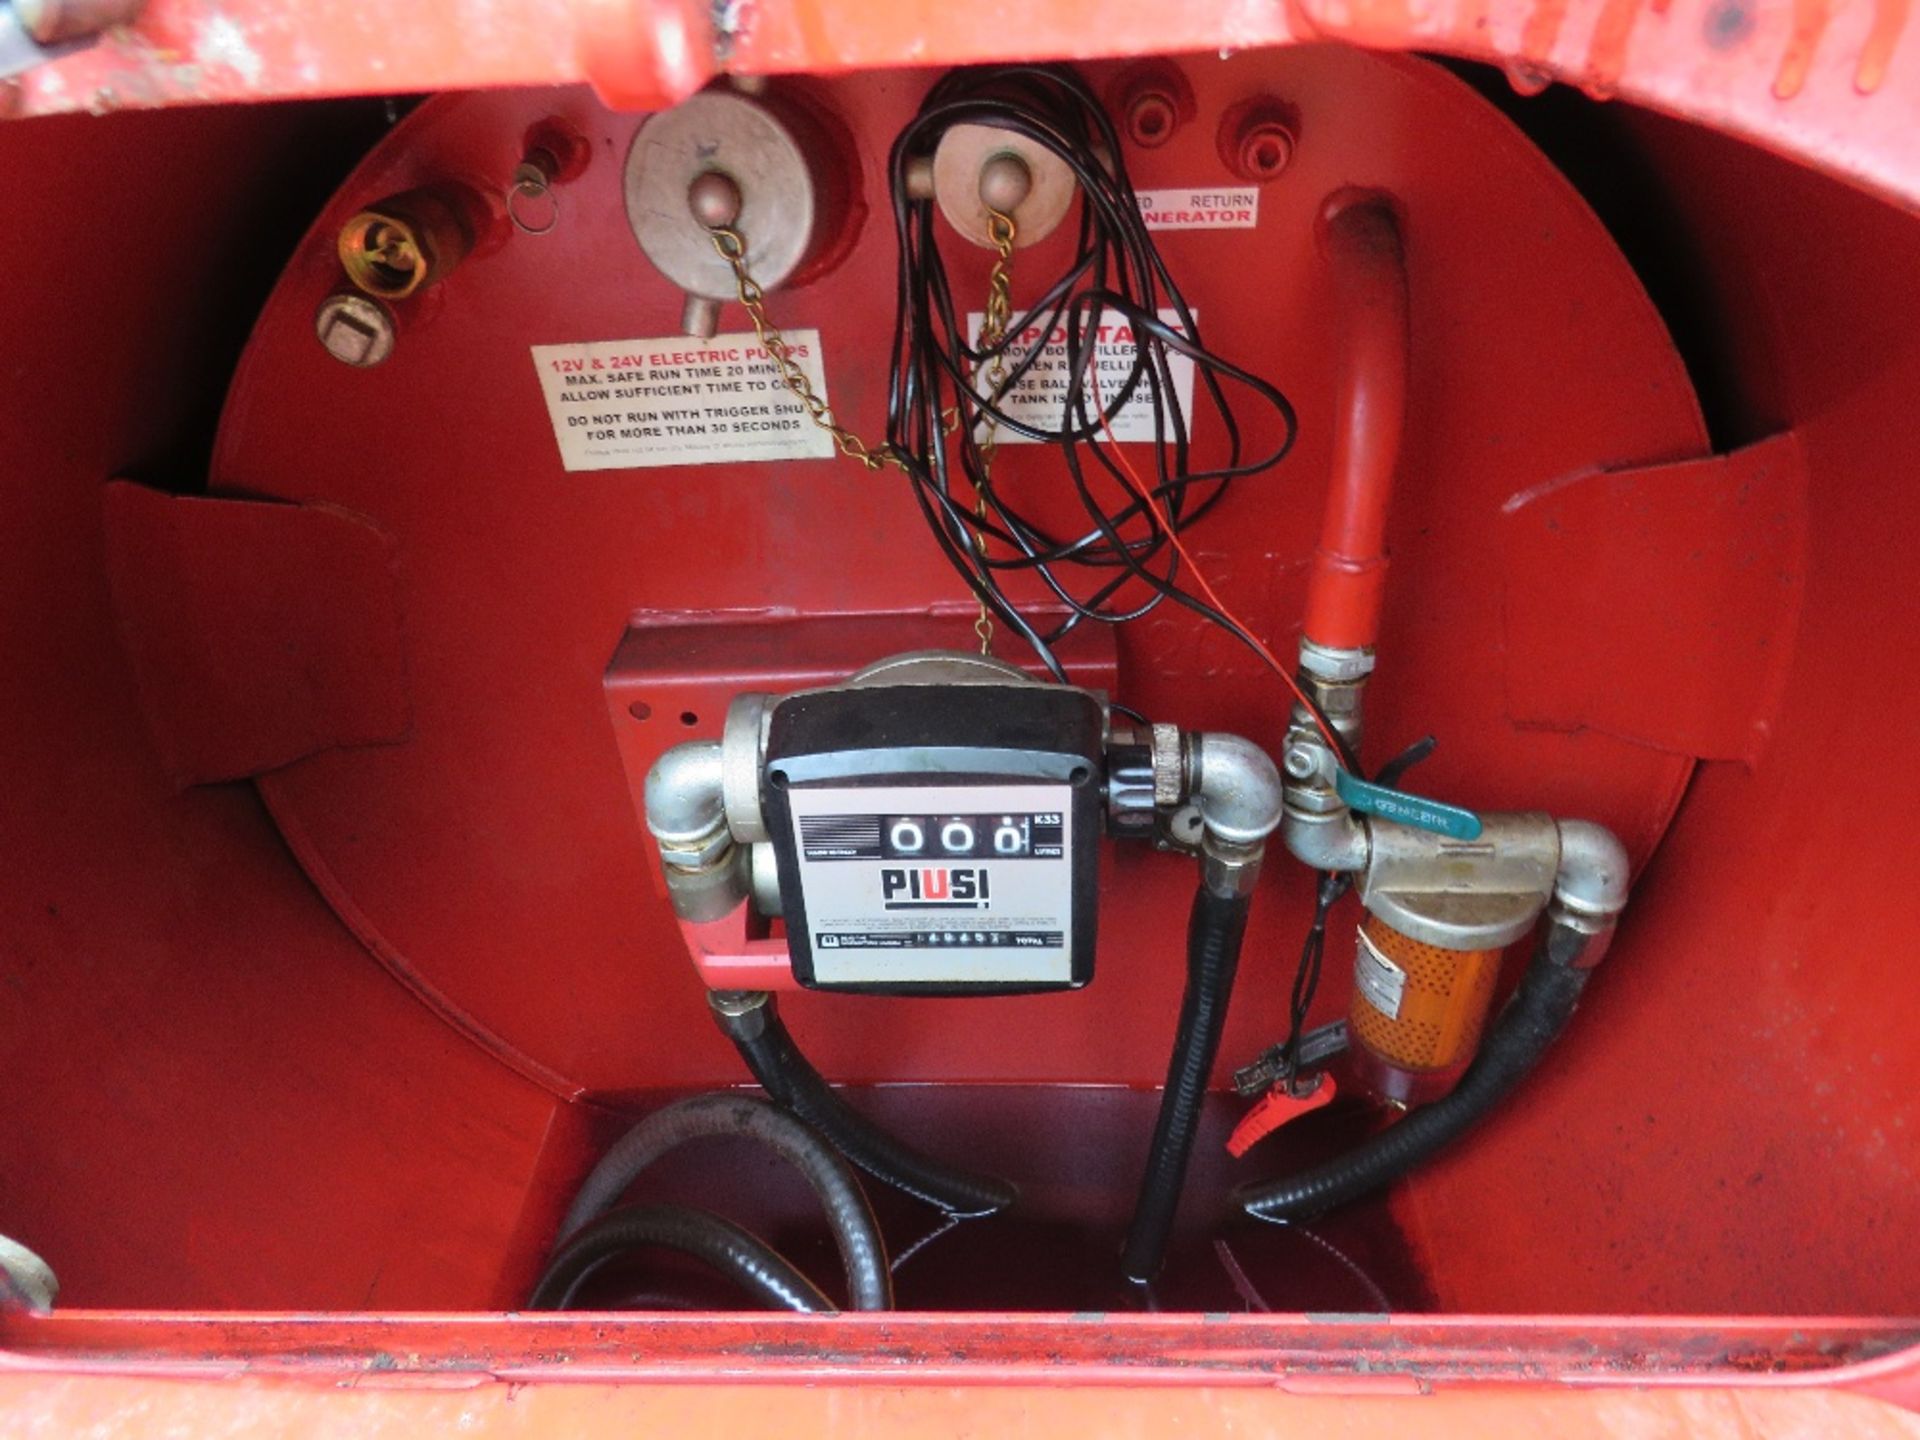 FUEL PROOF 500 LITRE TRACTOR FRONT LINKAGE MOUNTED BUNDED FUEL TANK. YEAR 2019 BUILD WITH PIUSI 12VO - Image 7 of 8